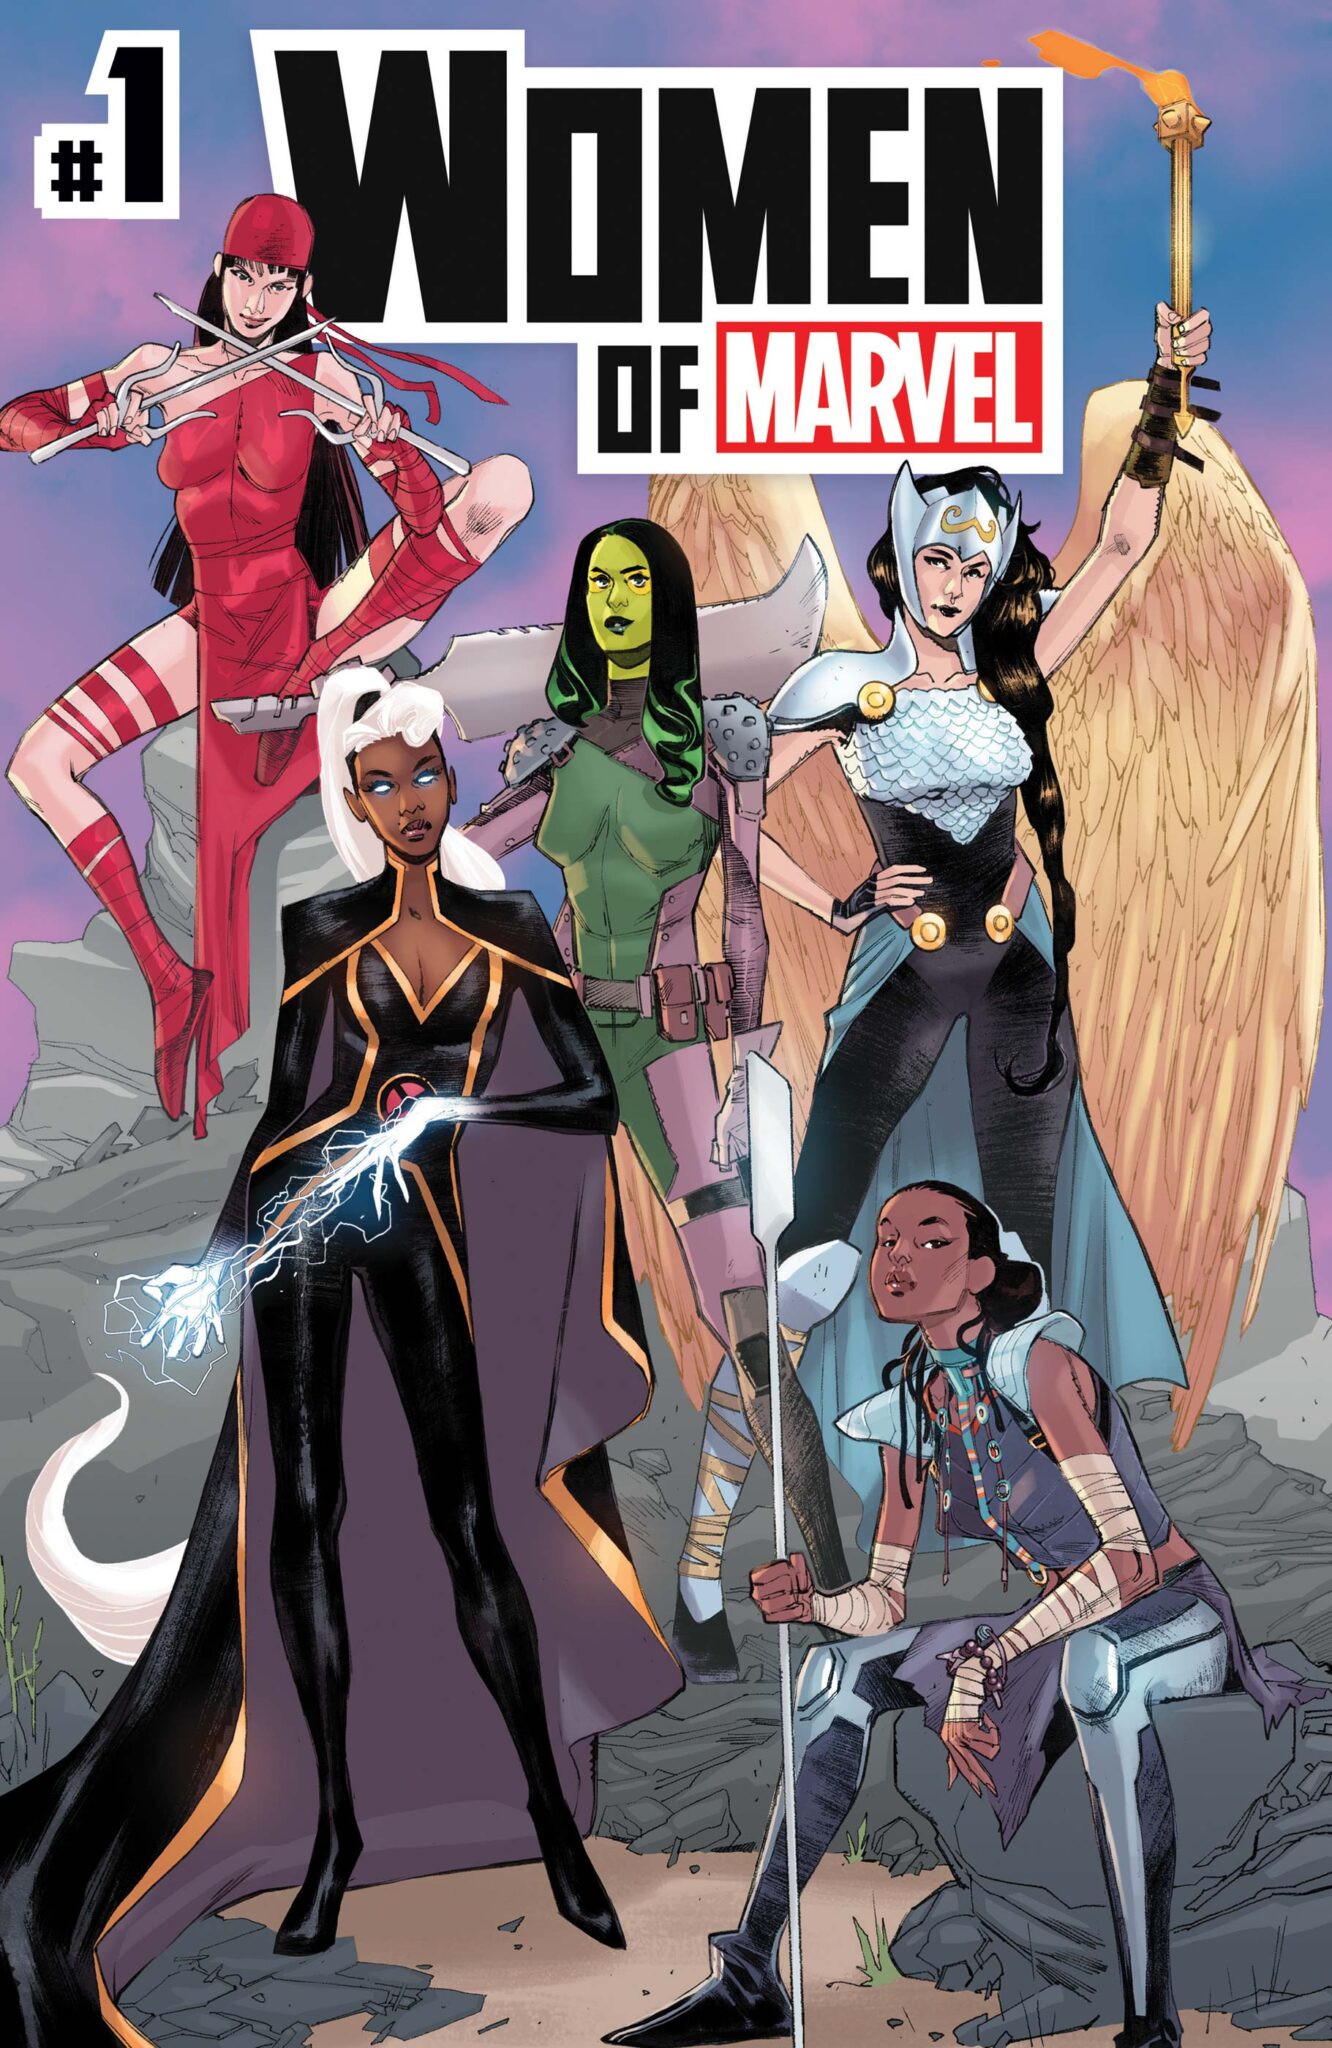 MARVEL’S MOST LEGENDARY HEROINES TAKE CENTER STAGE IN THE WOMEN OF